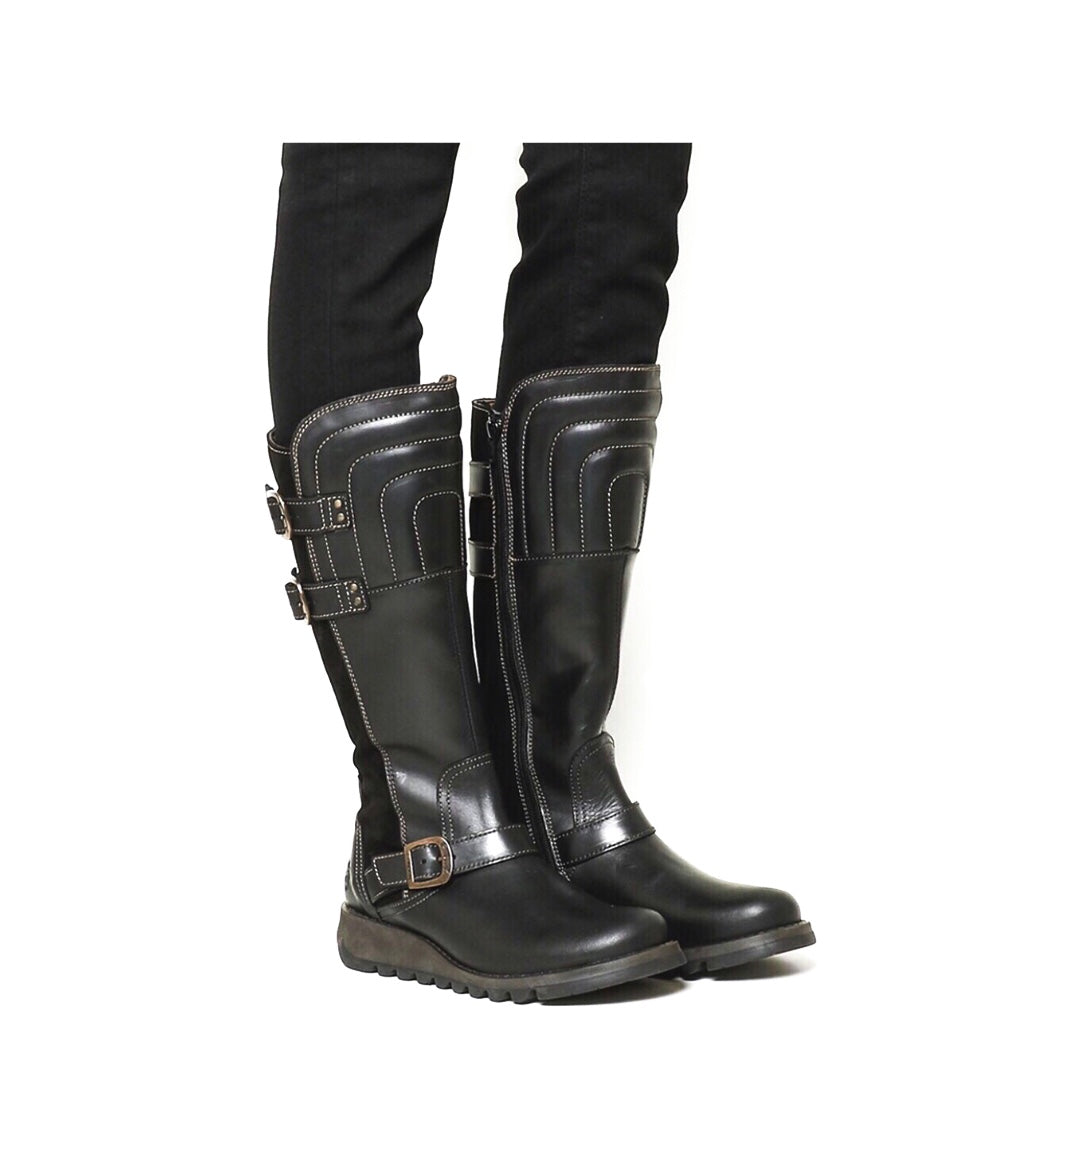 Fly London Sher Black 3 Buckles Zip Knee Hi Boots Made In Portugal